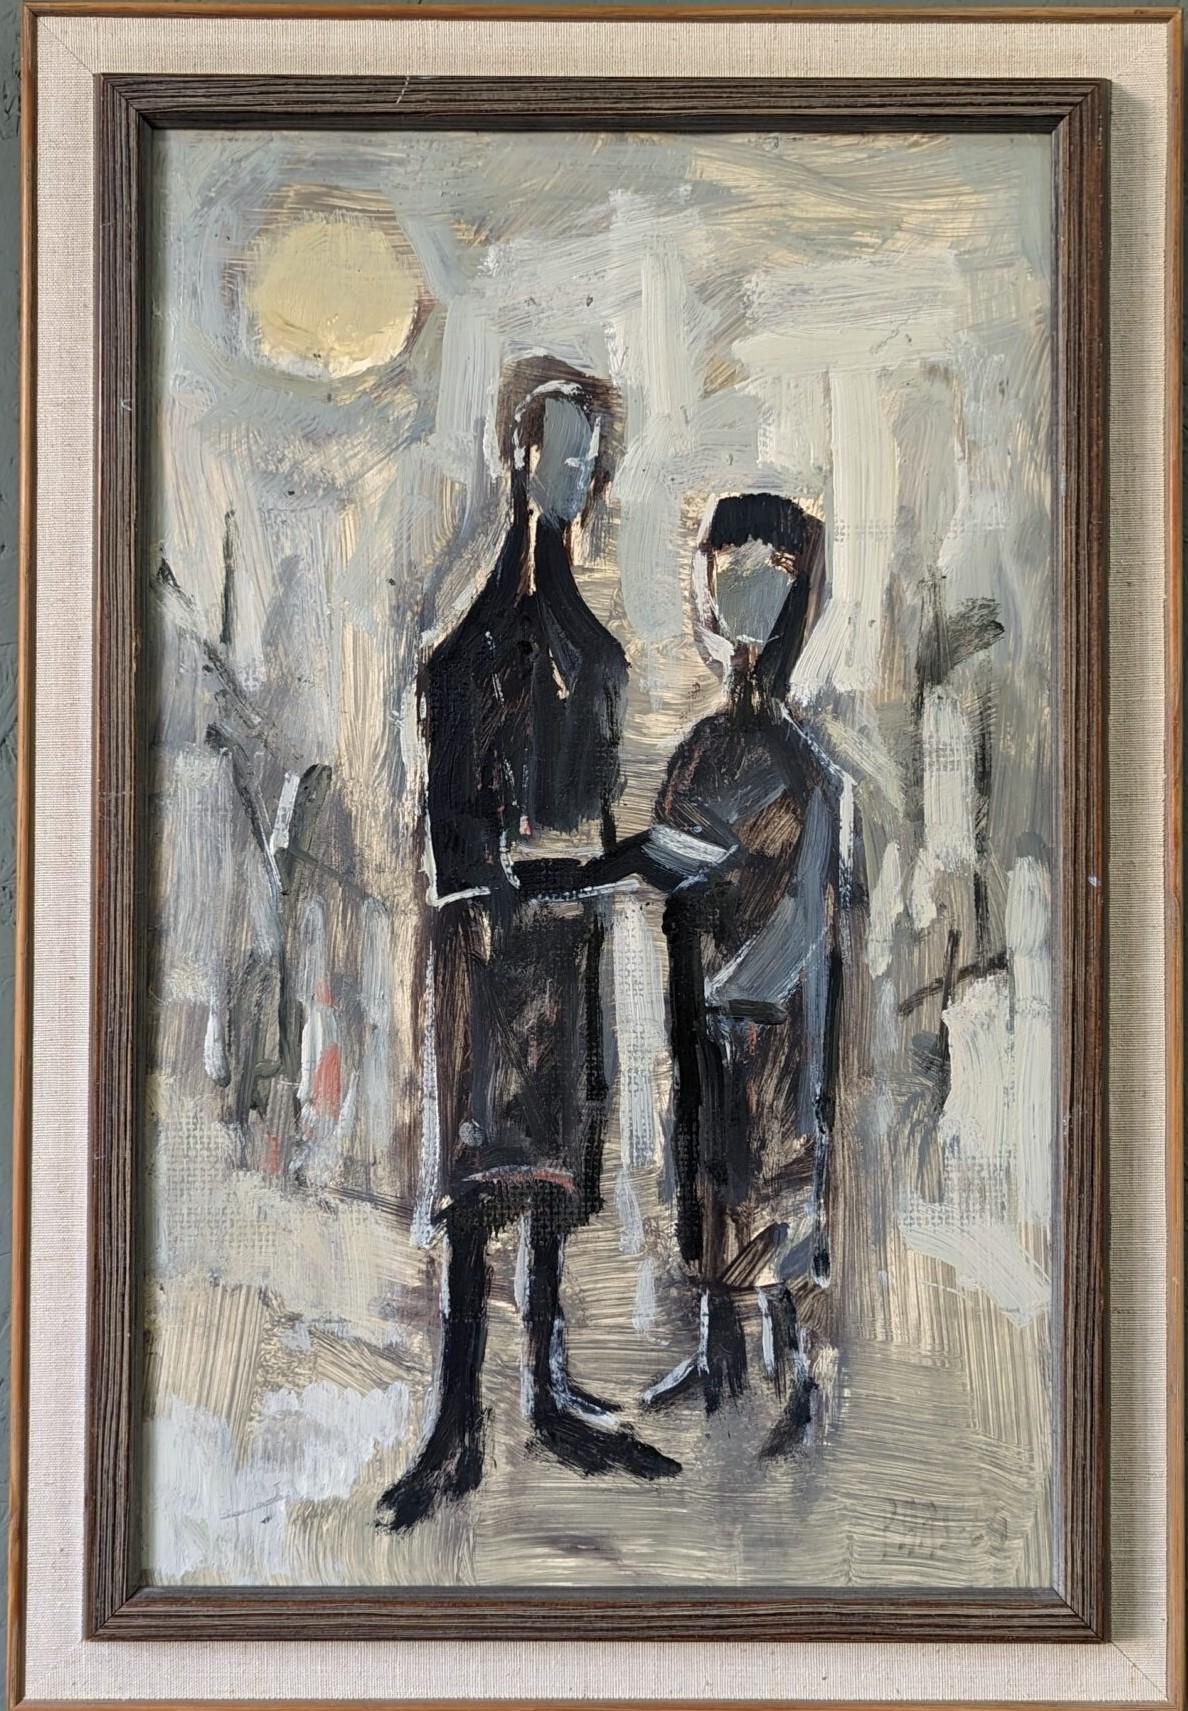 Unknown Figurative Painting - Vintage Mid-Century Modern Framed Figurative Oil Painting - Sunlight Silhouettes